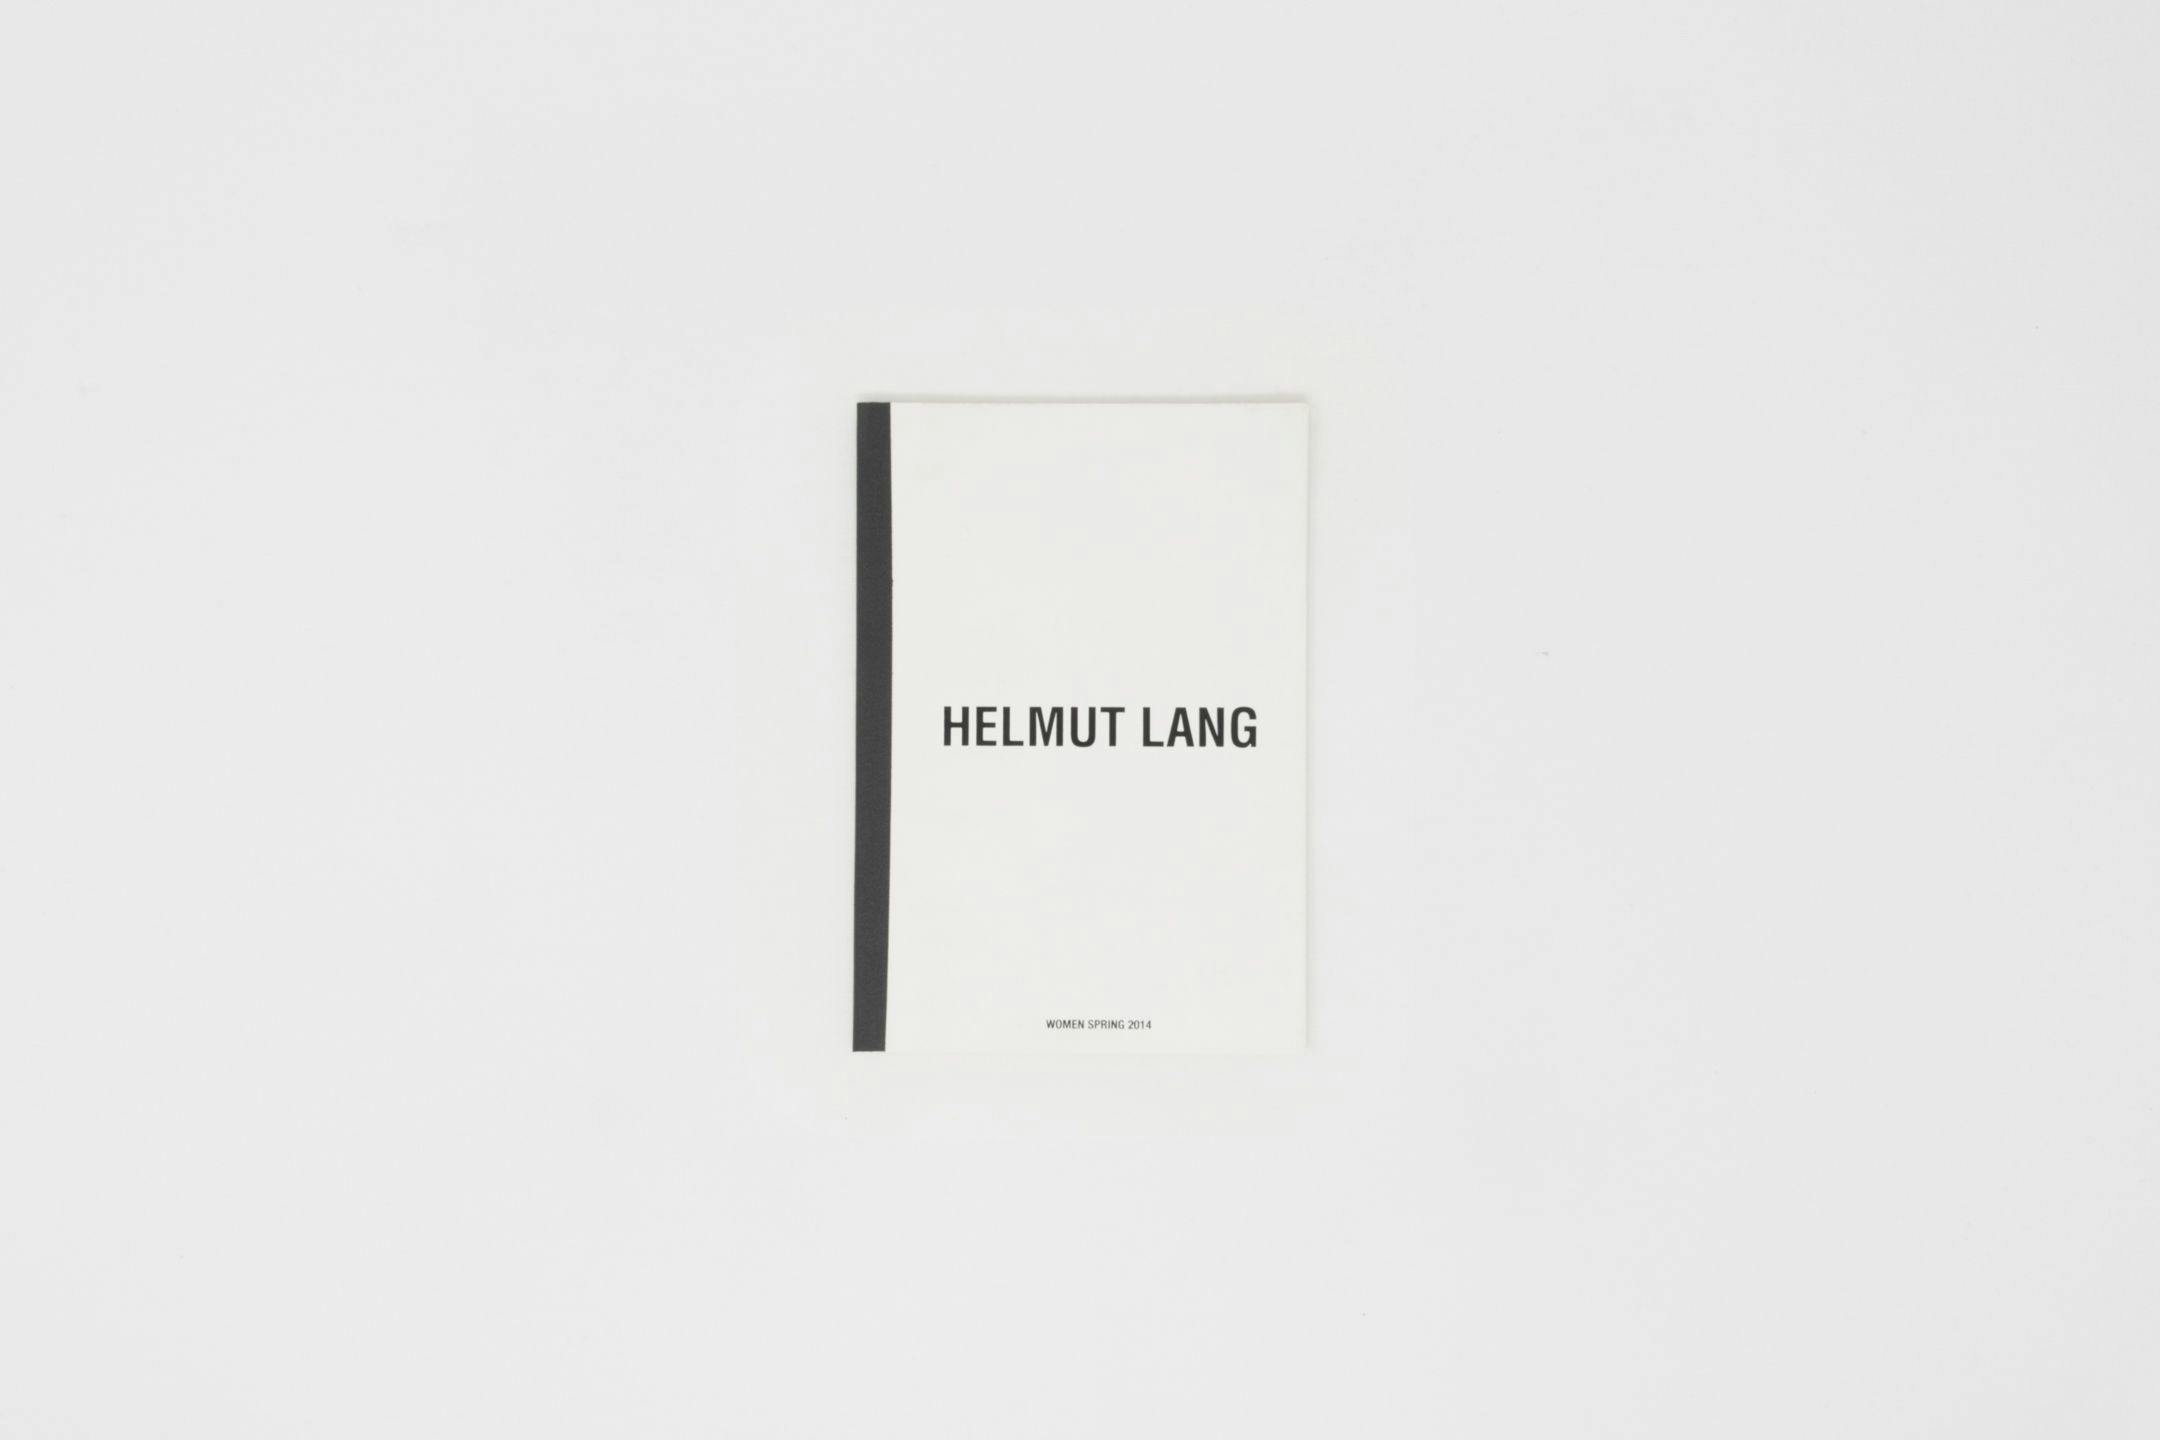 Helmut Lang AW 02-03 Postcard  International Library of Fashion Research